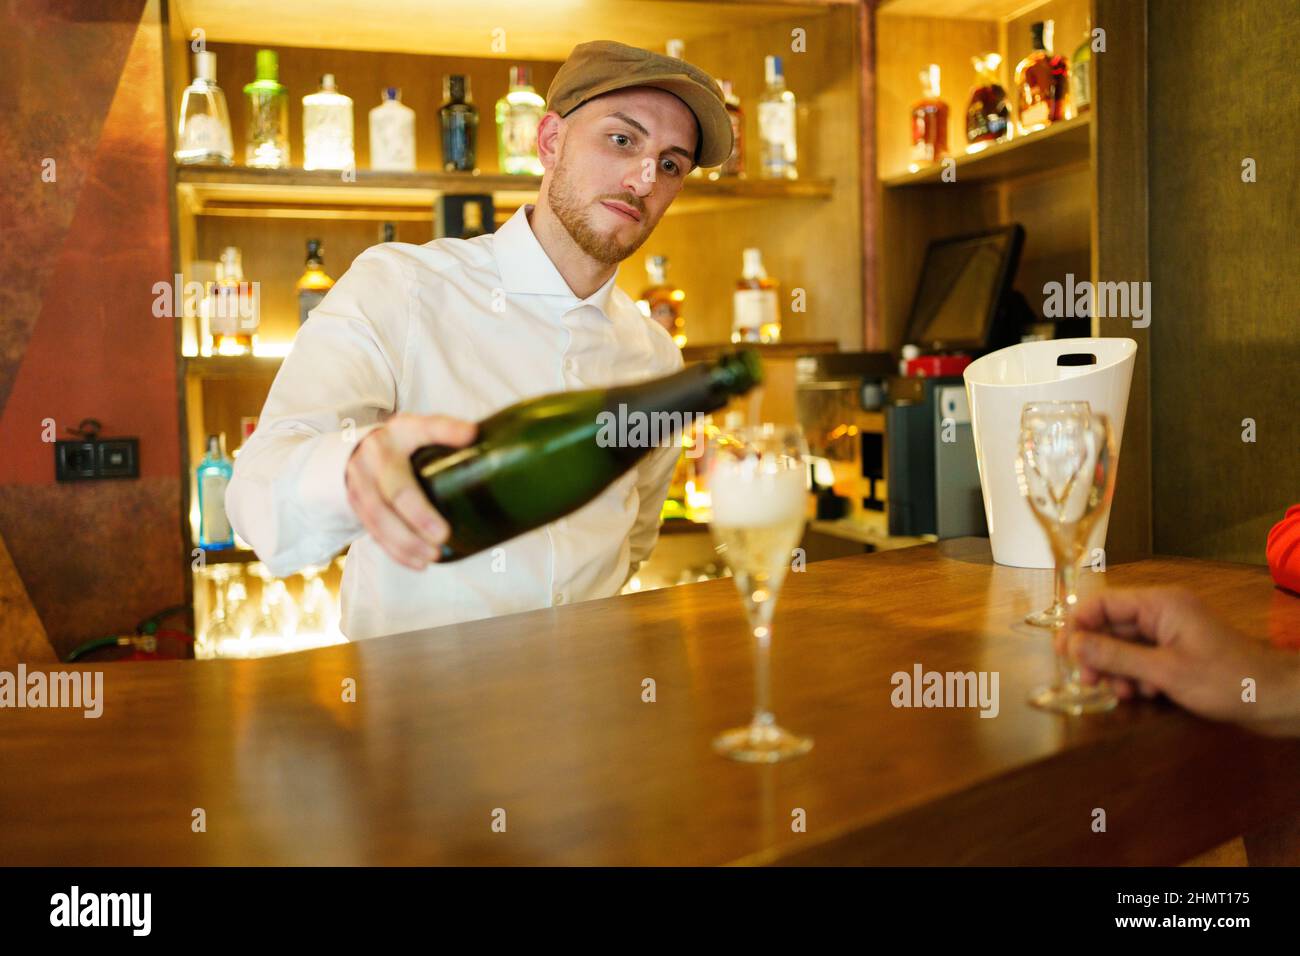 Barman pouring drink in glasses in bar Stock Photo